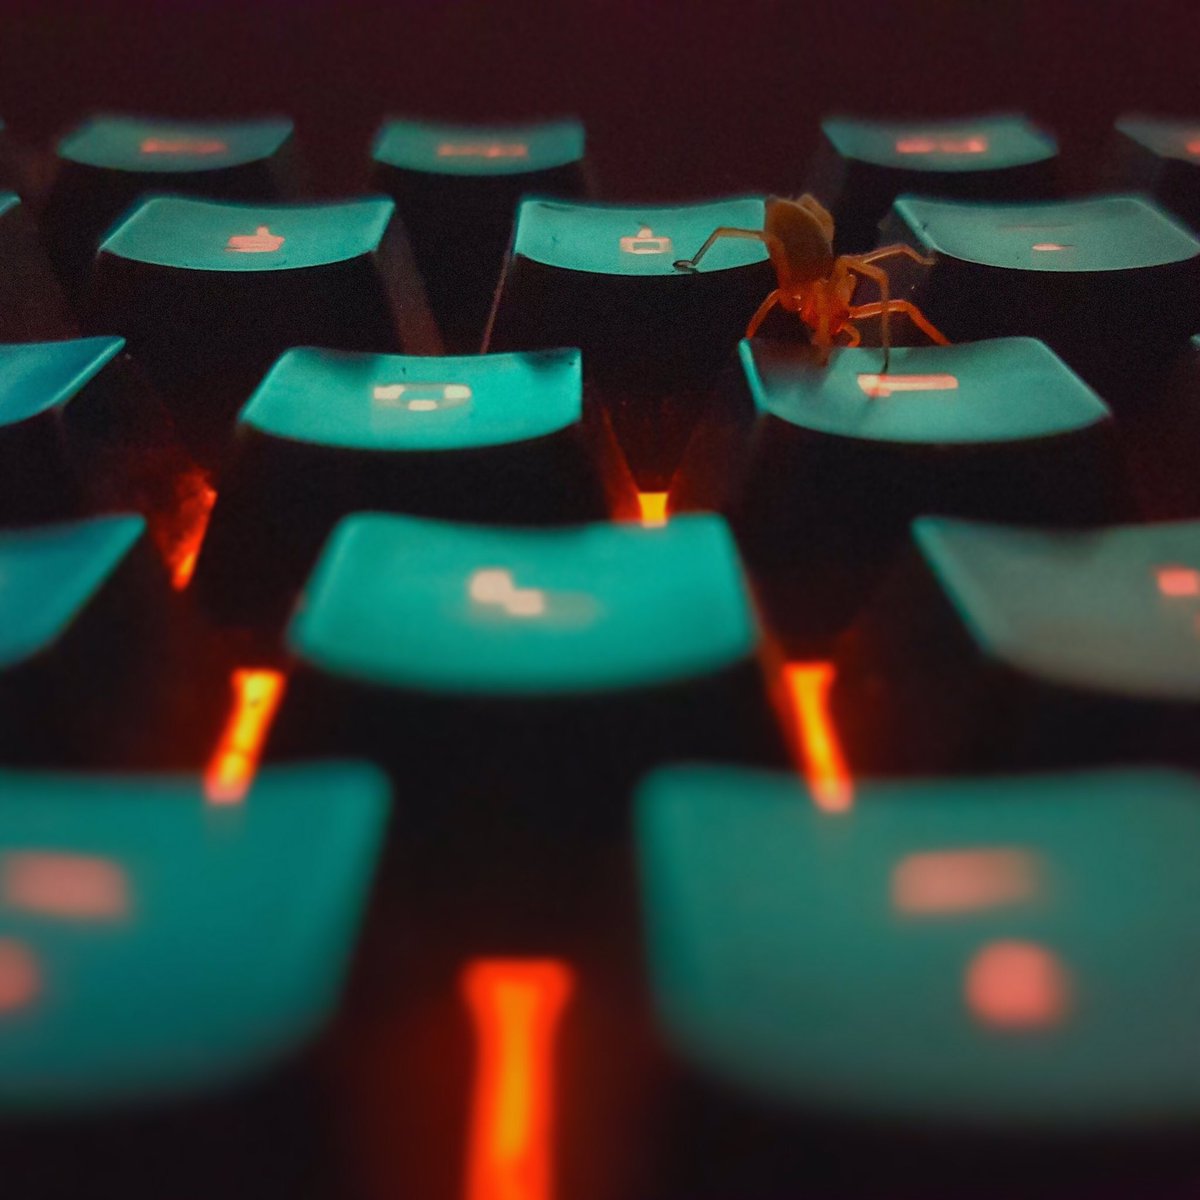 it's writing me a cute little message ☺️

#cmstorm #illuminated #coloured #keyboard #aww #itsybitsyspider #cutey #insect #spider 🕷